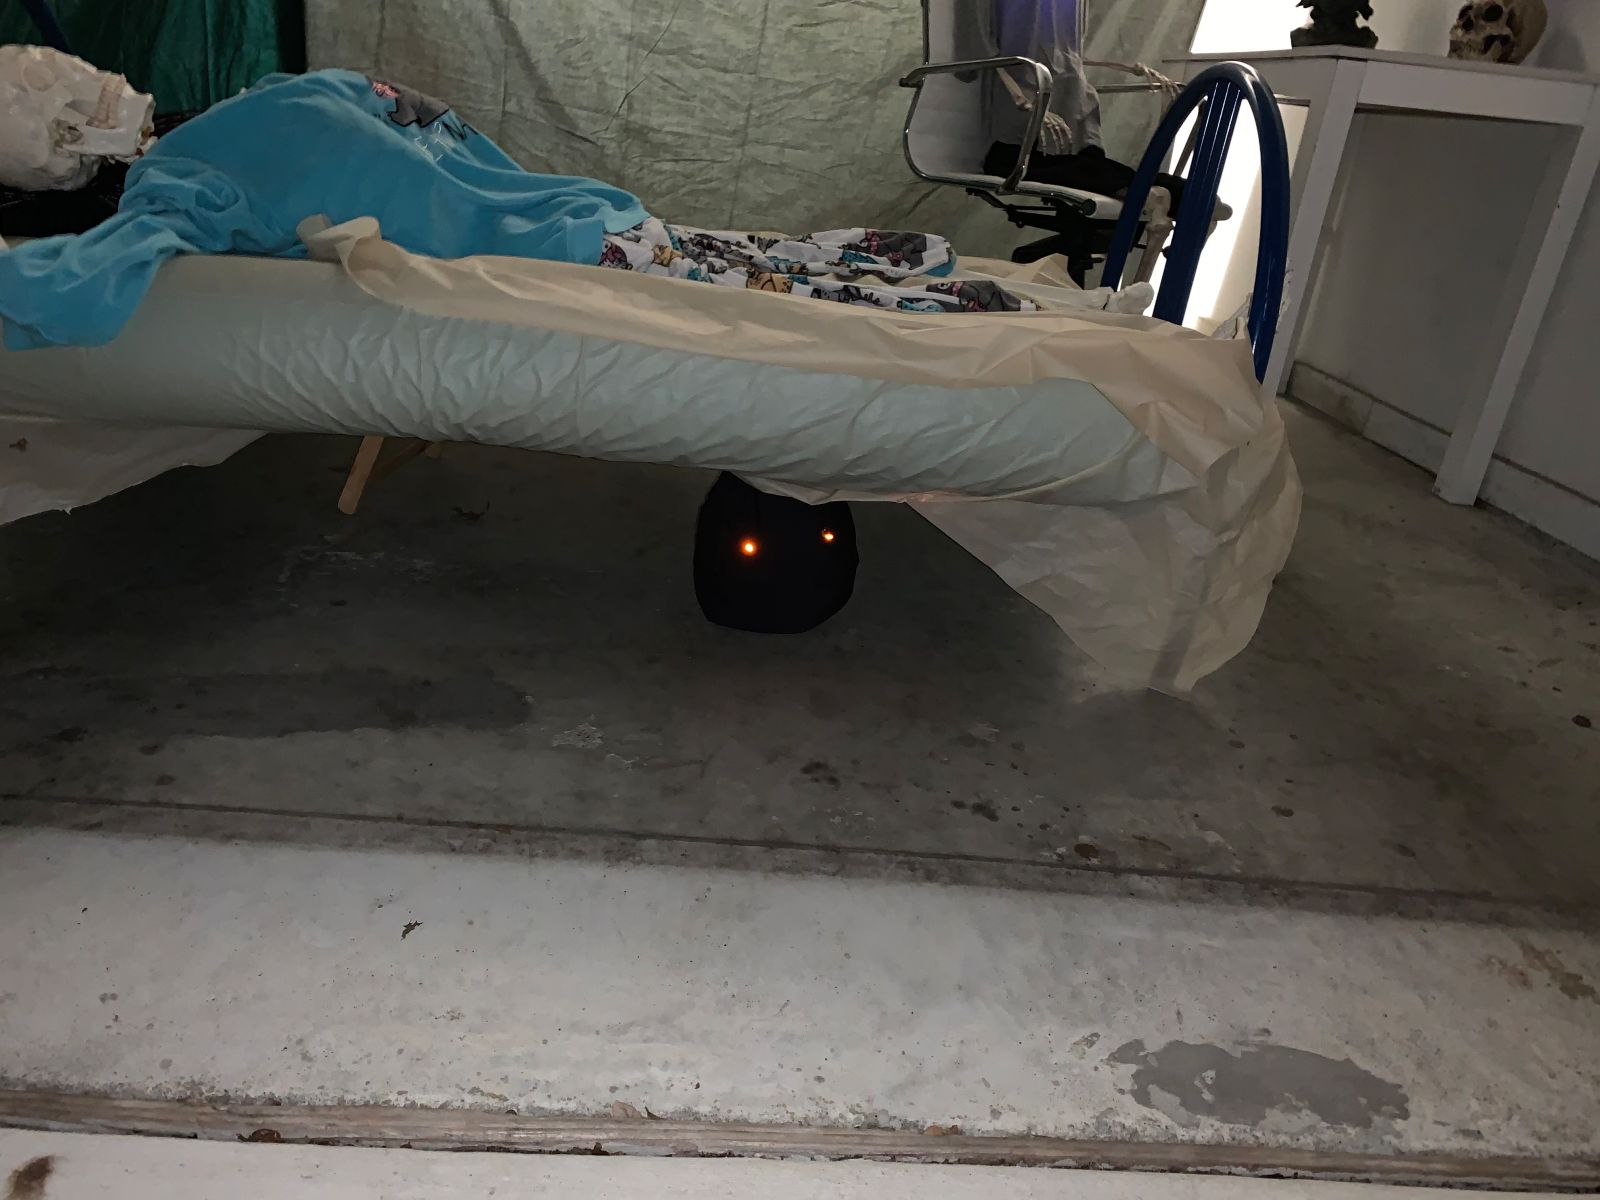 Something under the bed